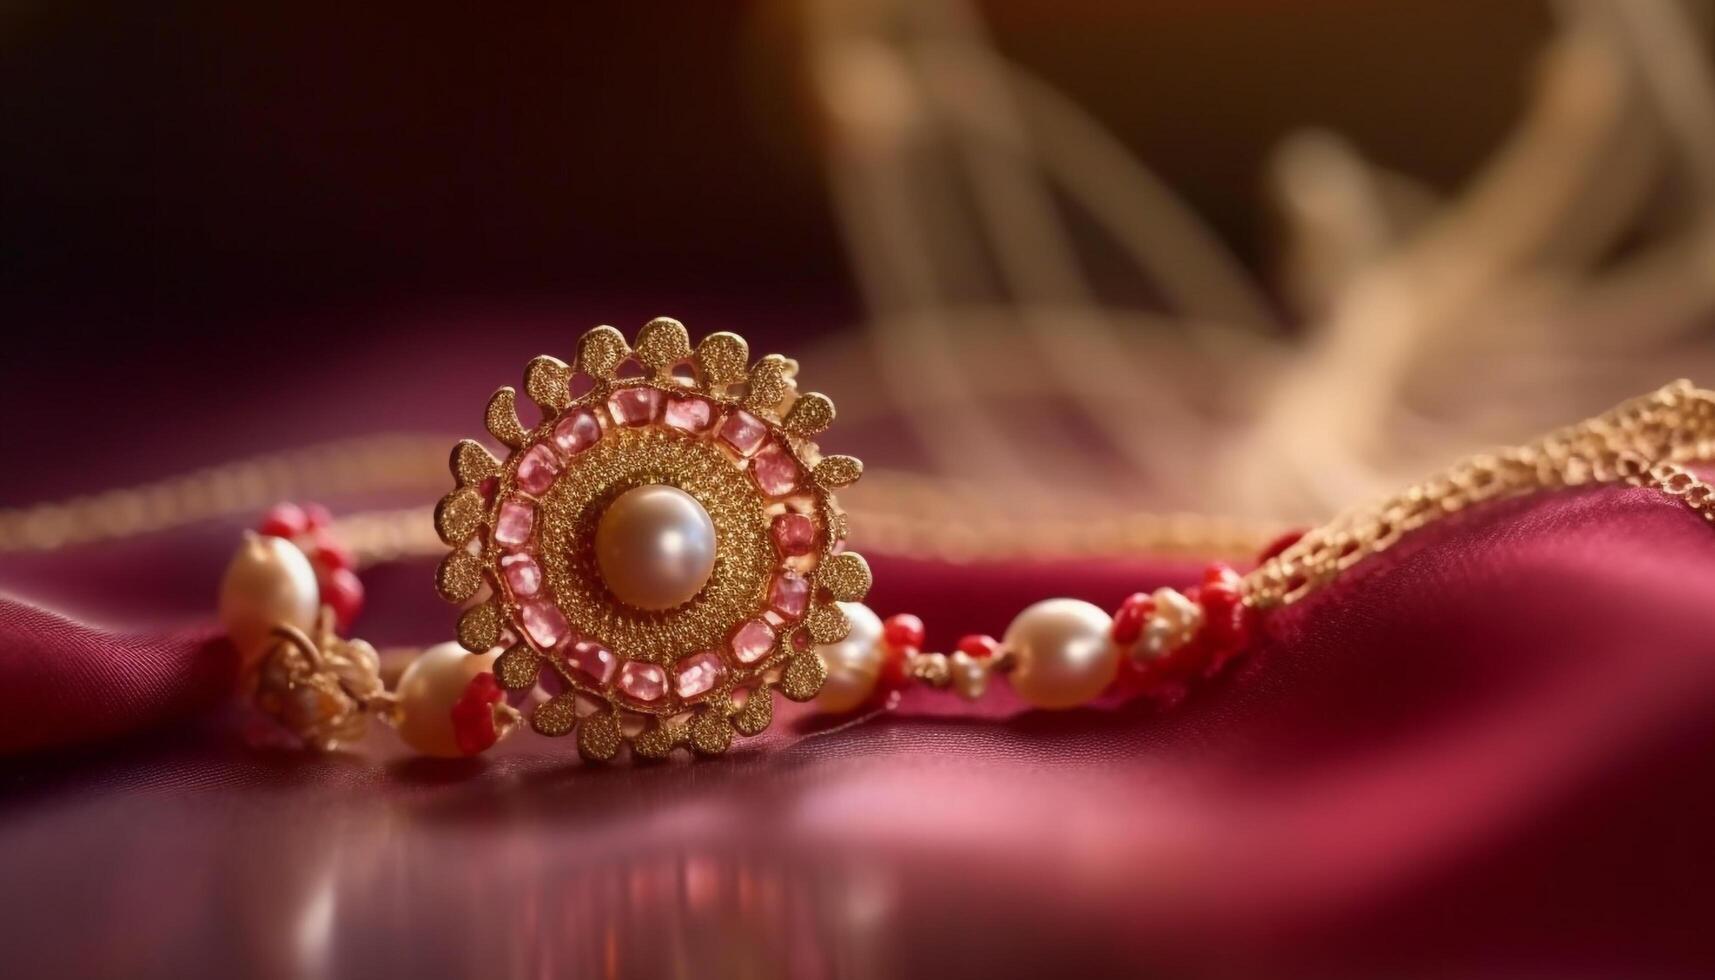 Indian bride ornate gold jewelry exudes elegance and spirituality generated by AI photo